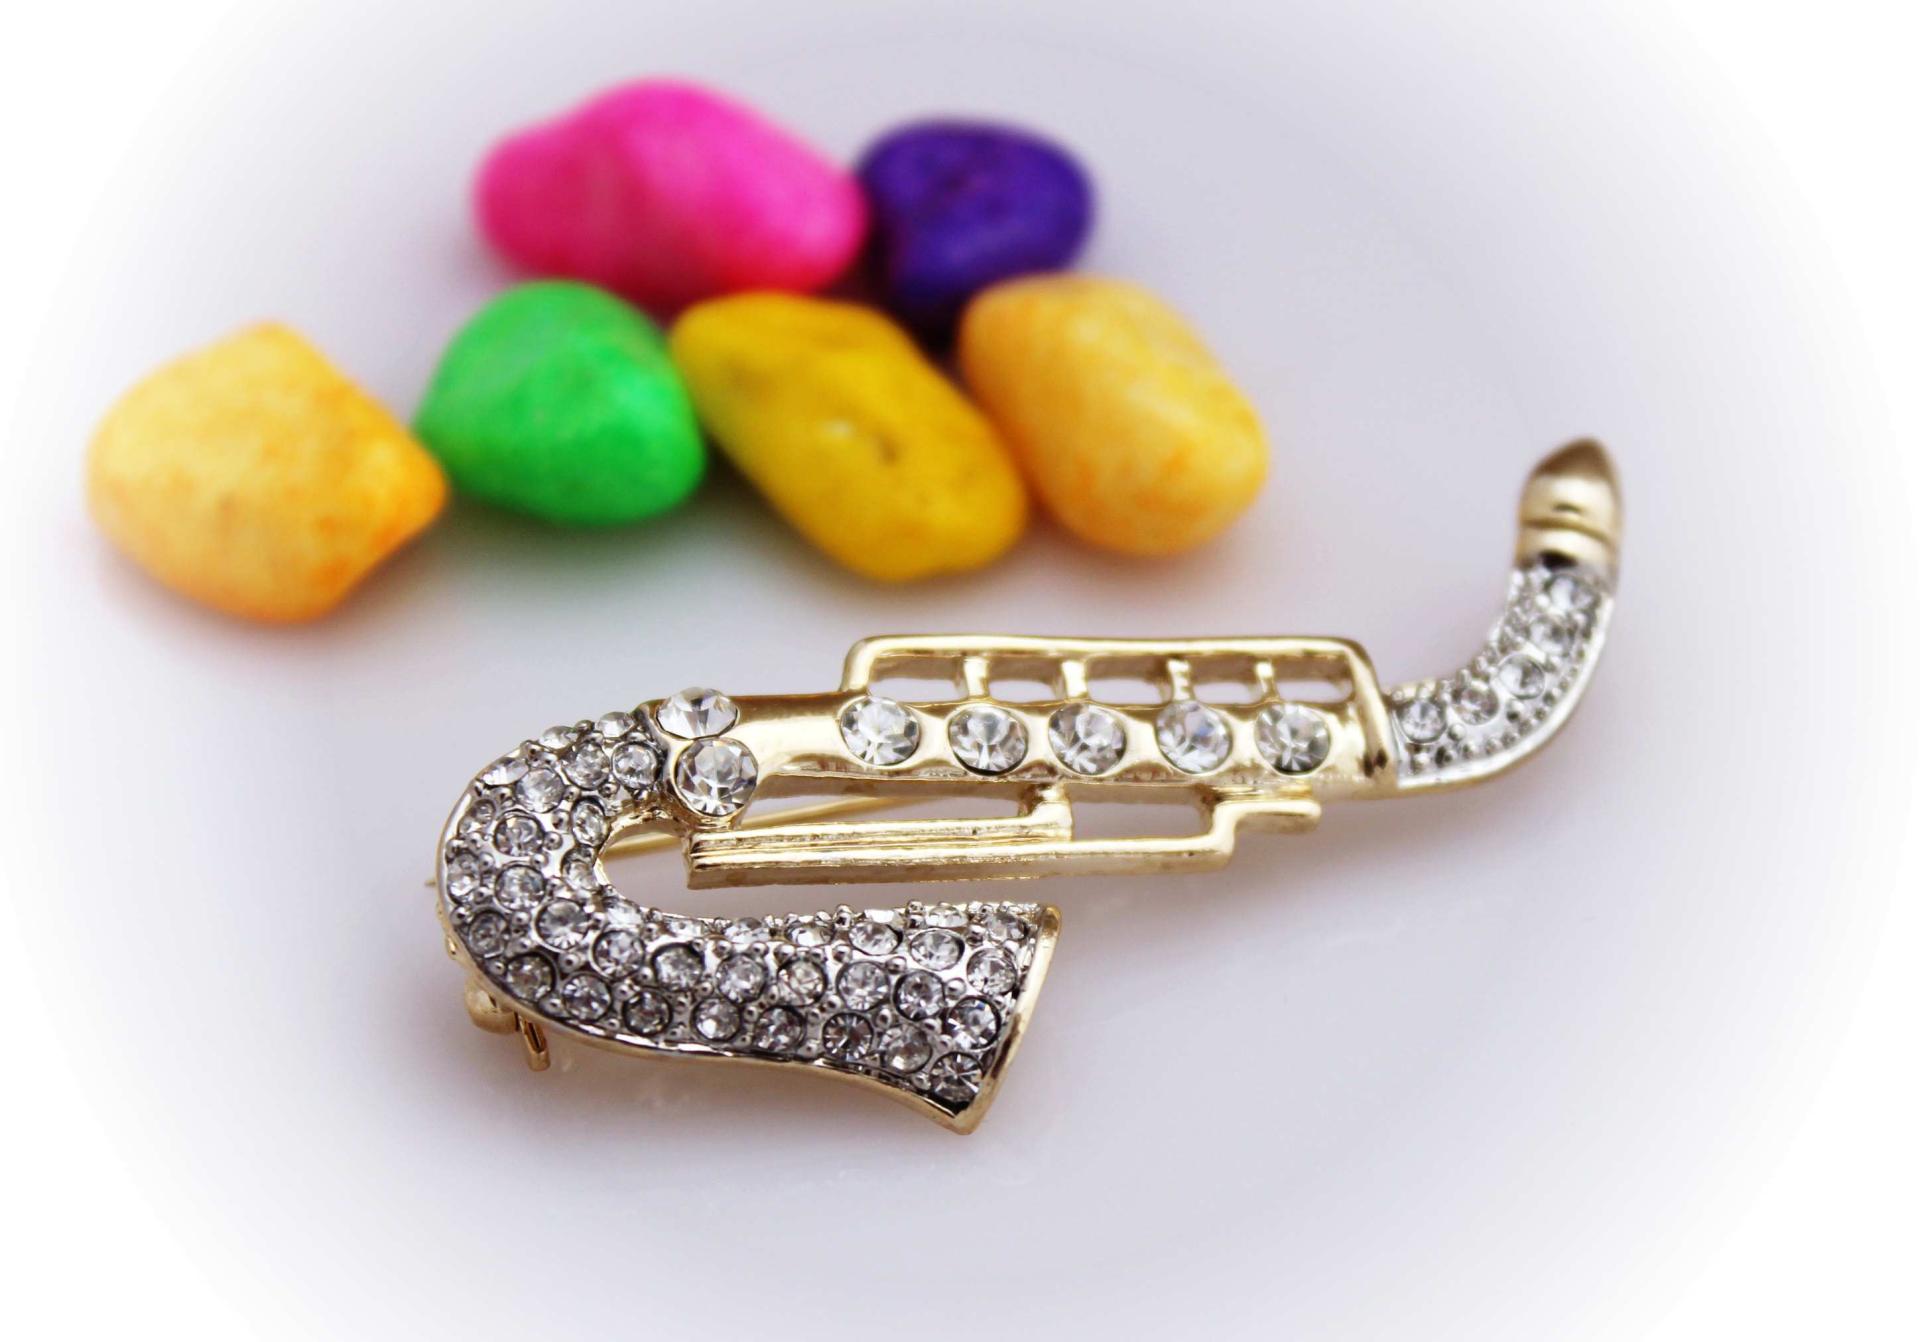 Saxophone Brooch With Crystal Stones